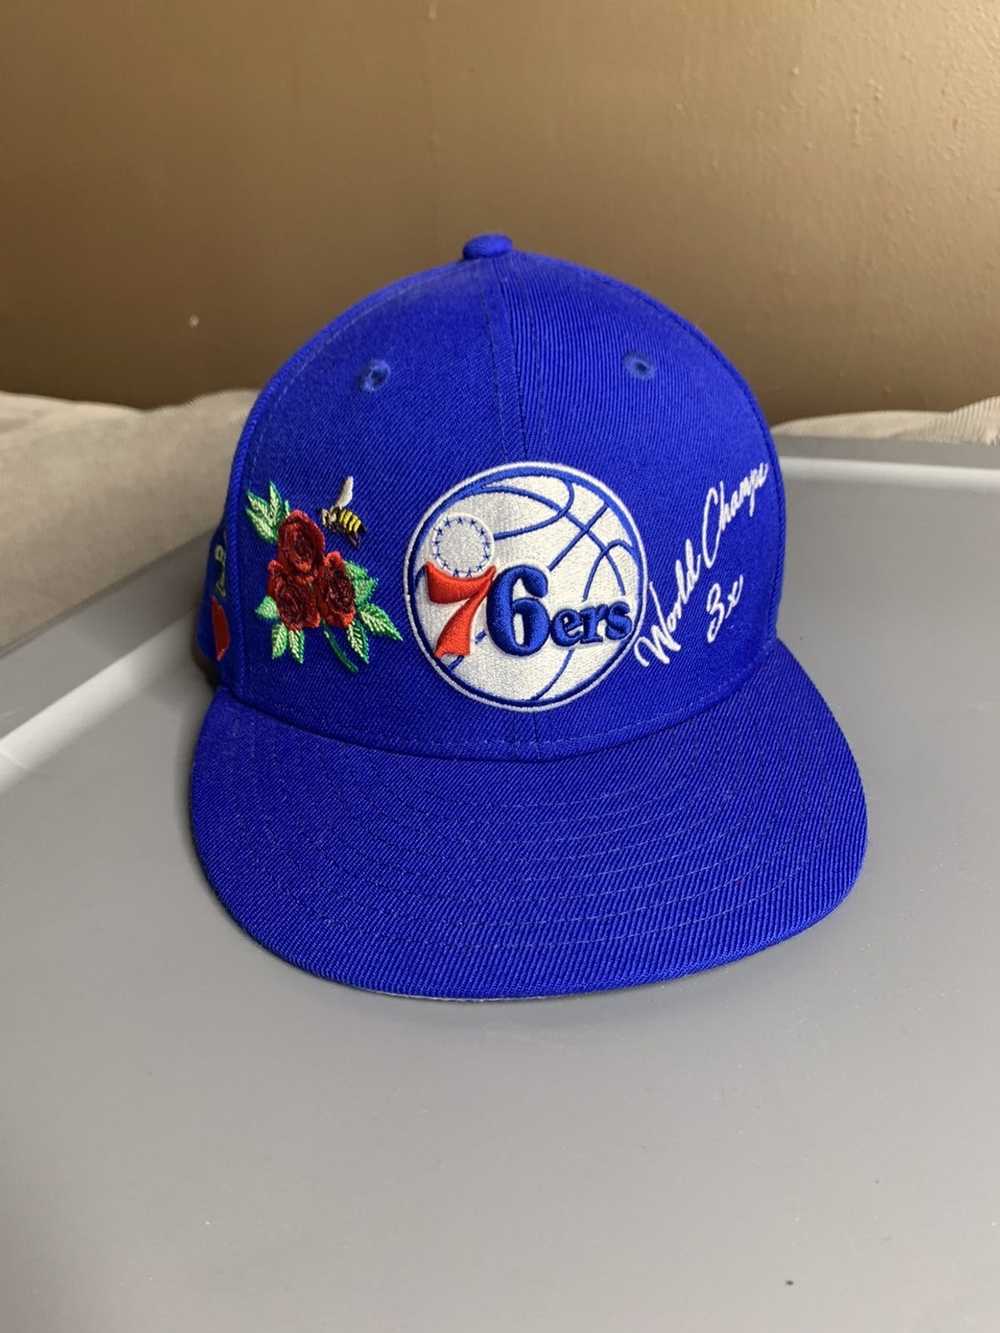 New Era 76ers New era Fitted hat - image 5